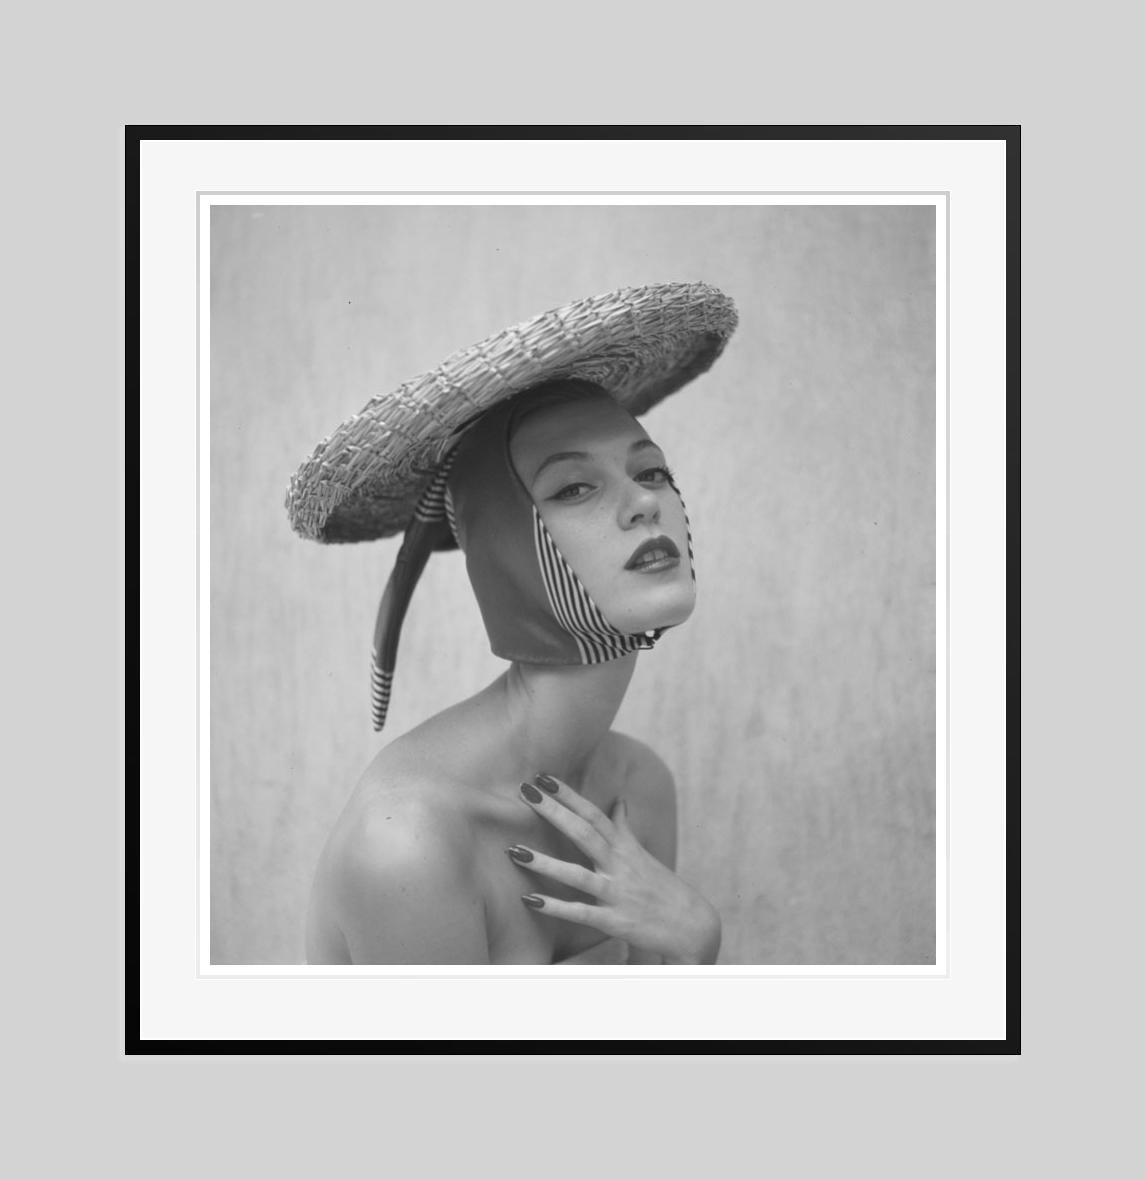  Girl In A Hat 1951 Limited Signature Stamped Edition  - Photograph by Toni Frissell